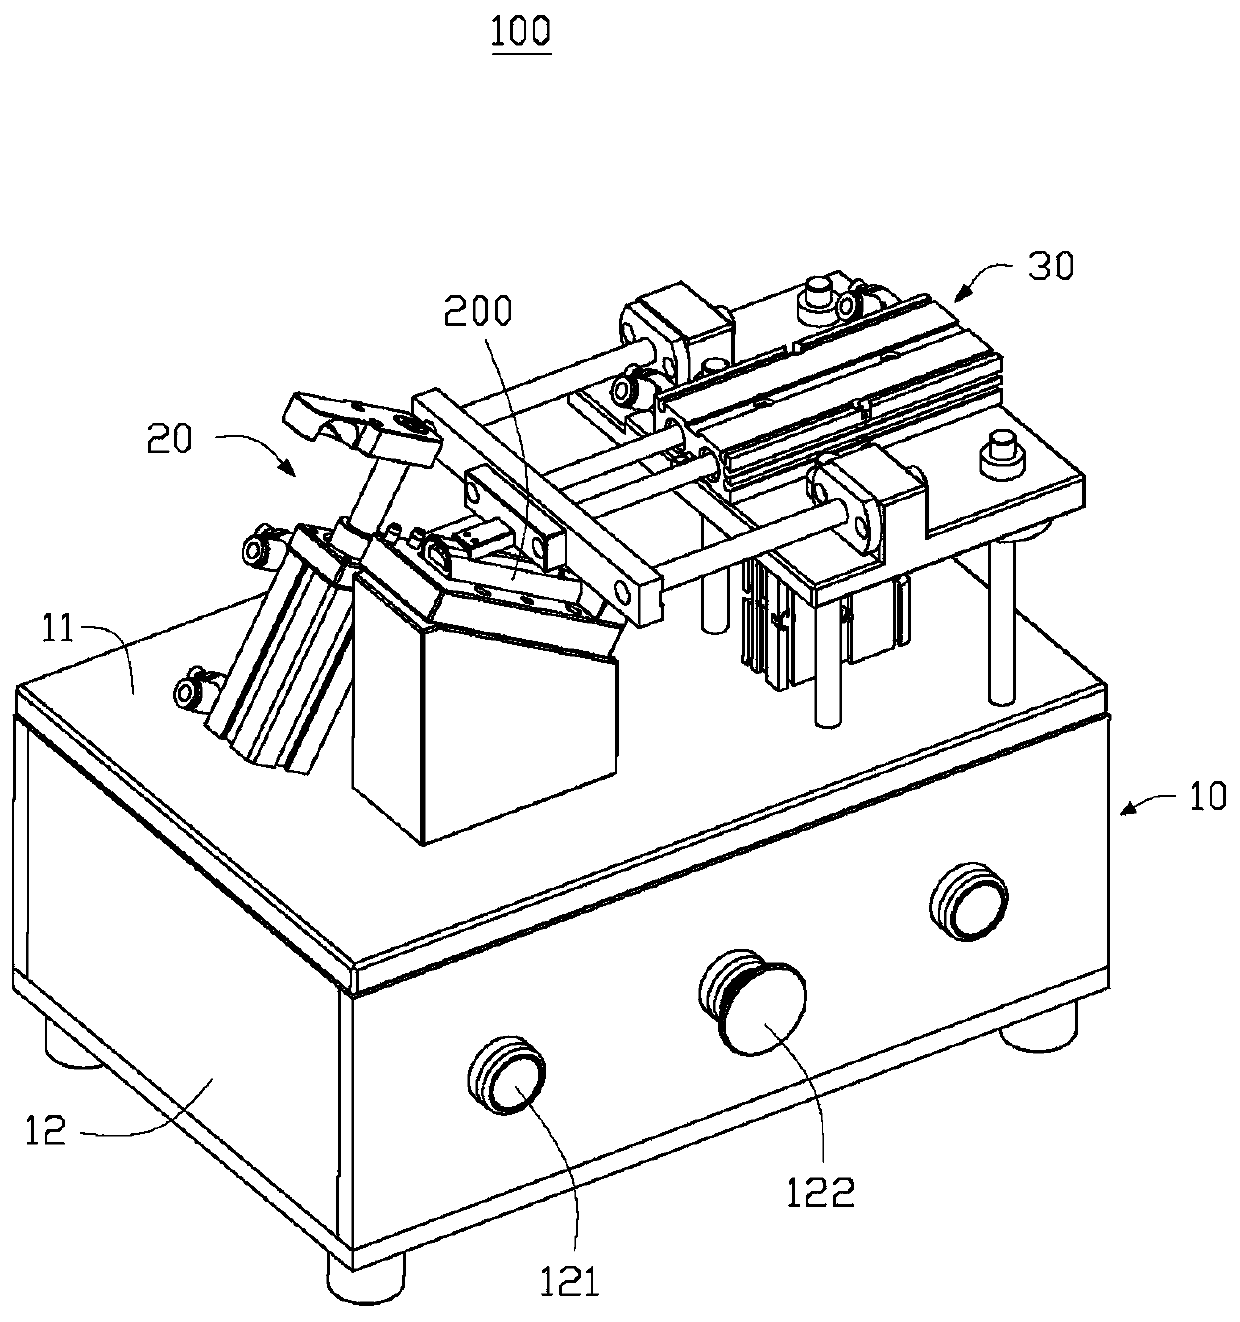 Automatic film sticking device